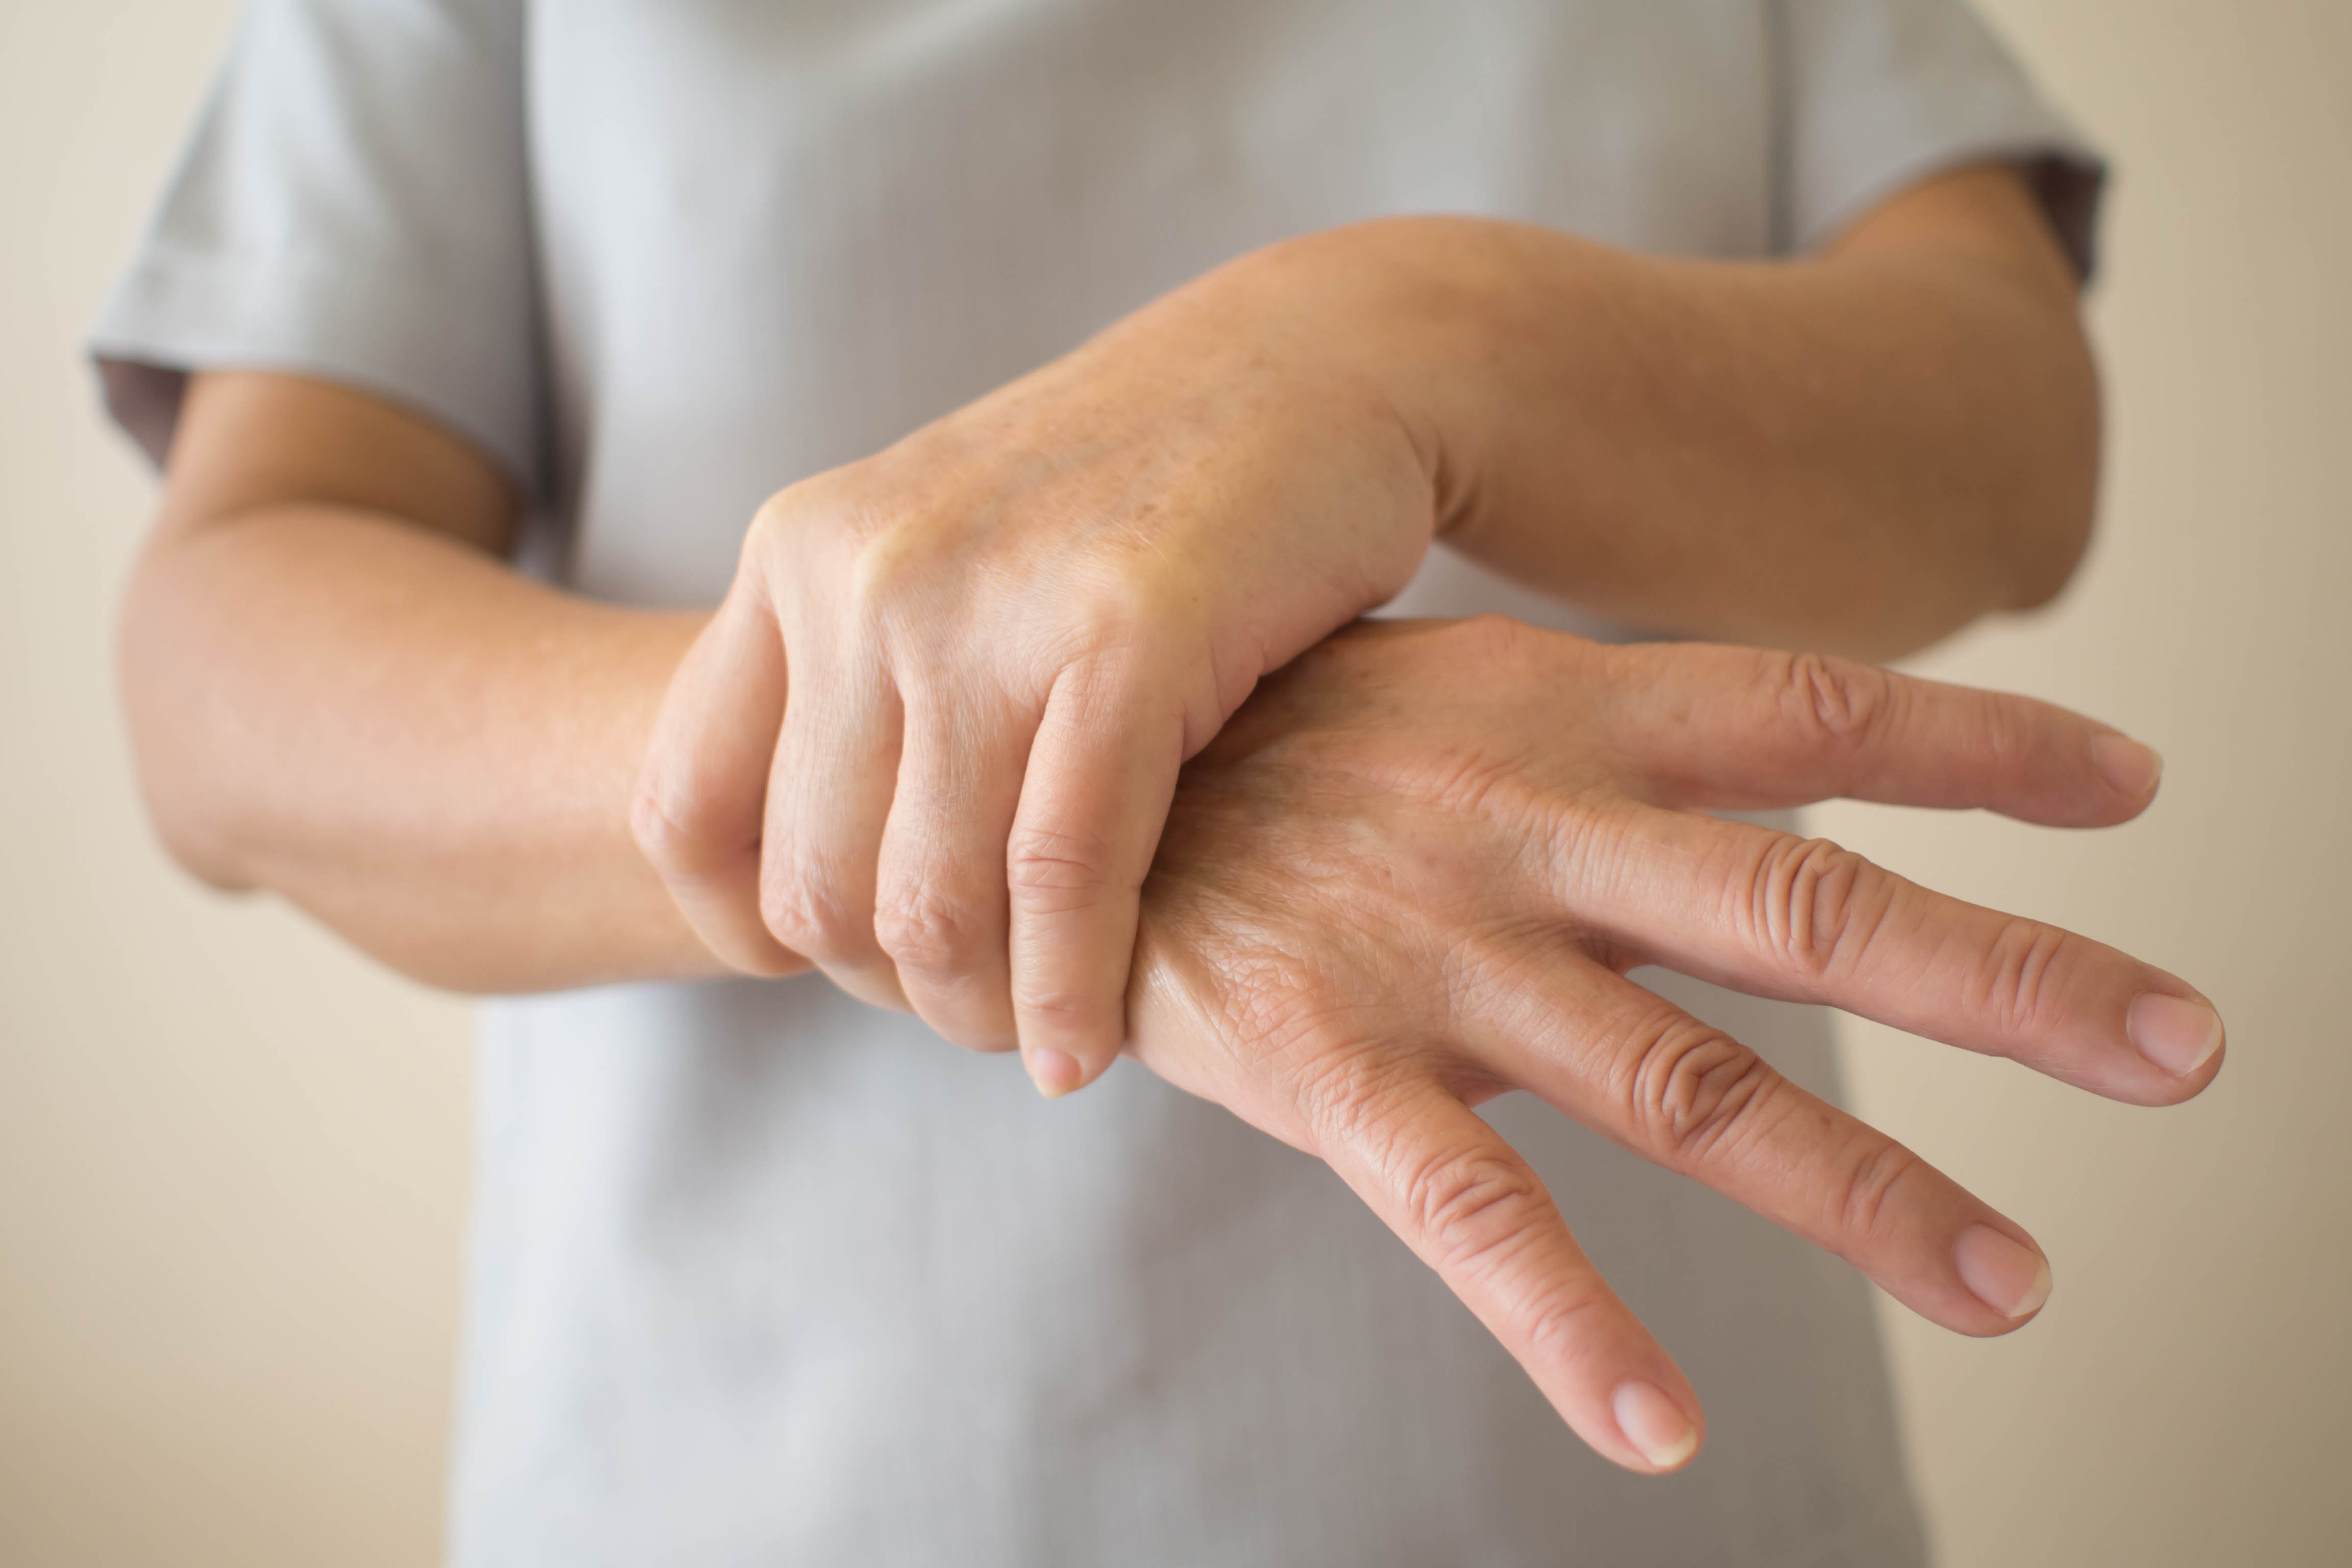 Does Carpal Tunnel Syndrome Always Cause Pain?